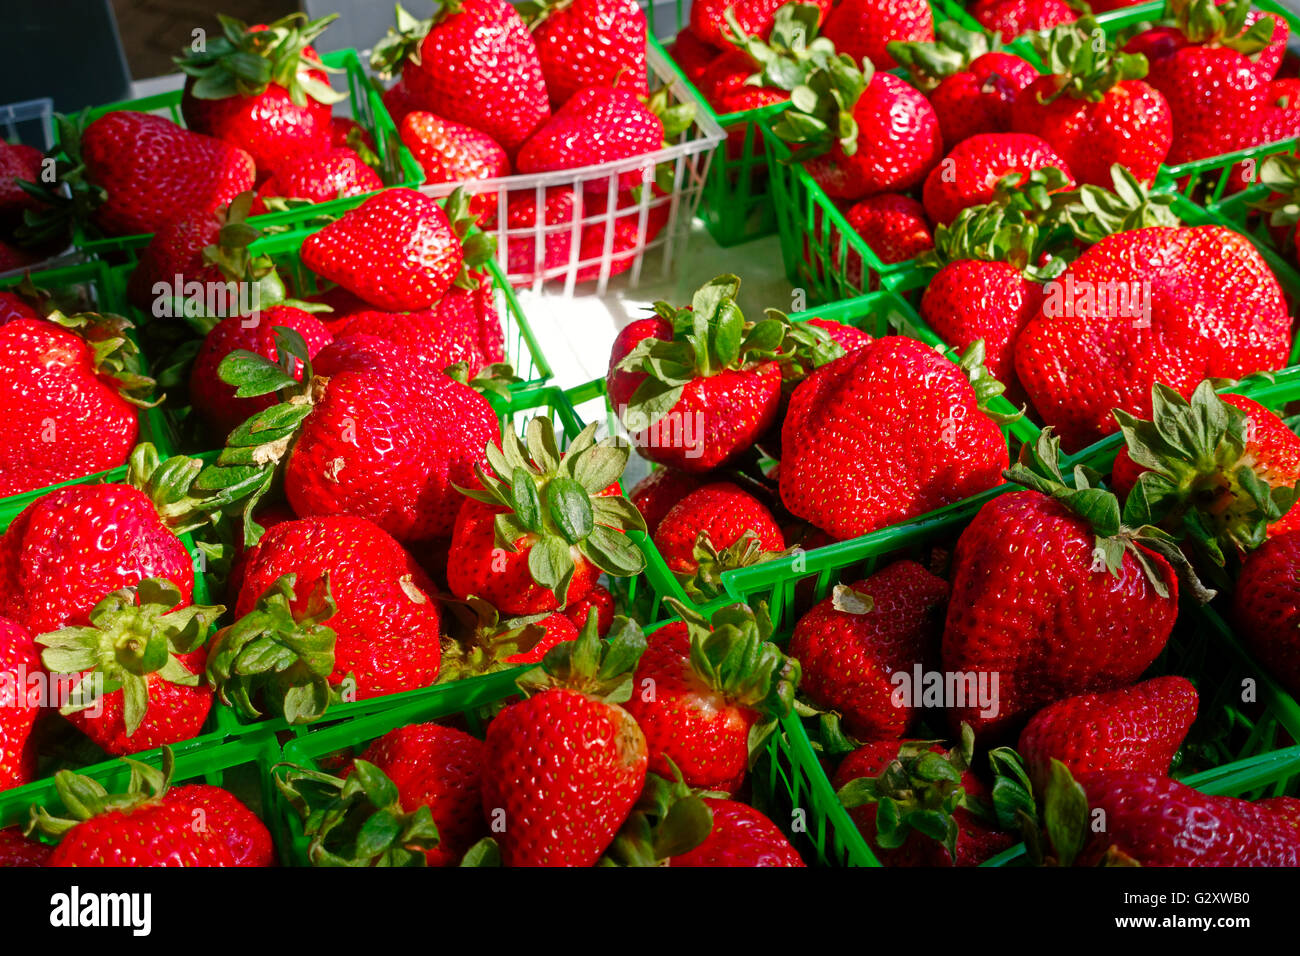 Fresh strawberries for sale in a market Stock Photo